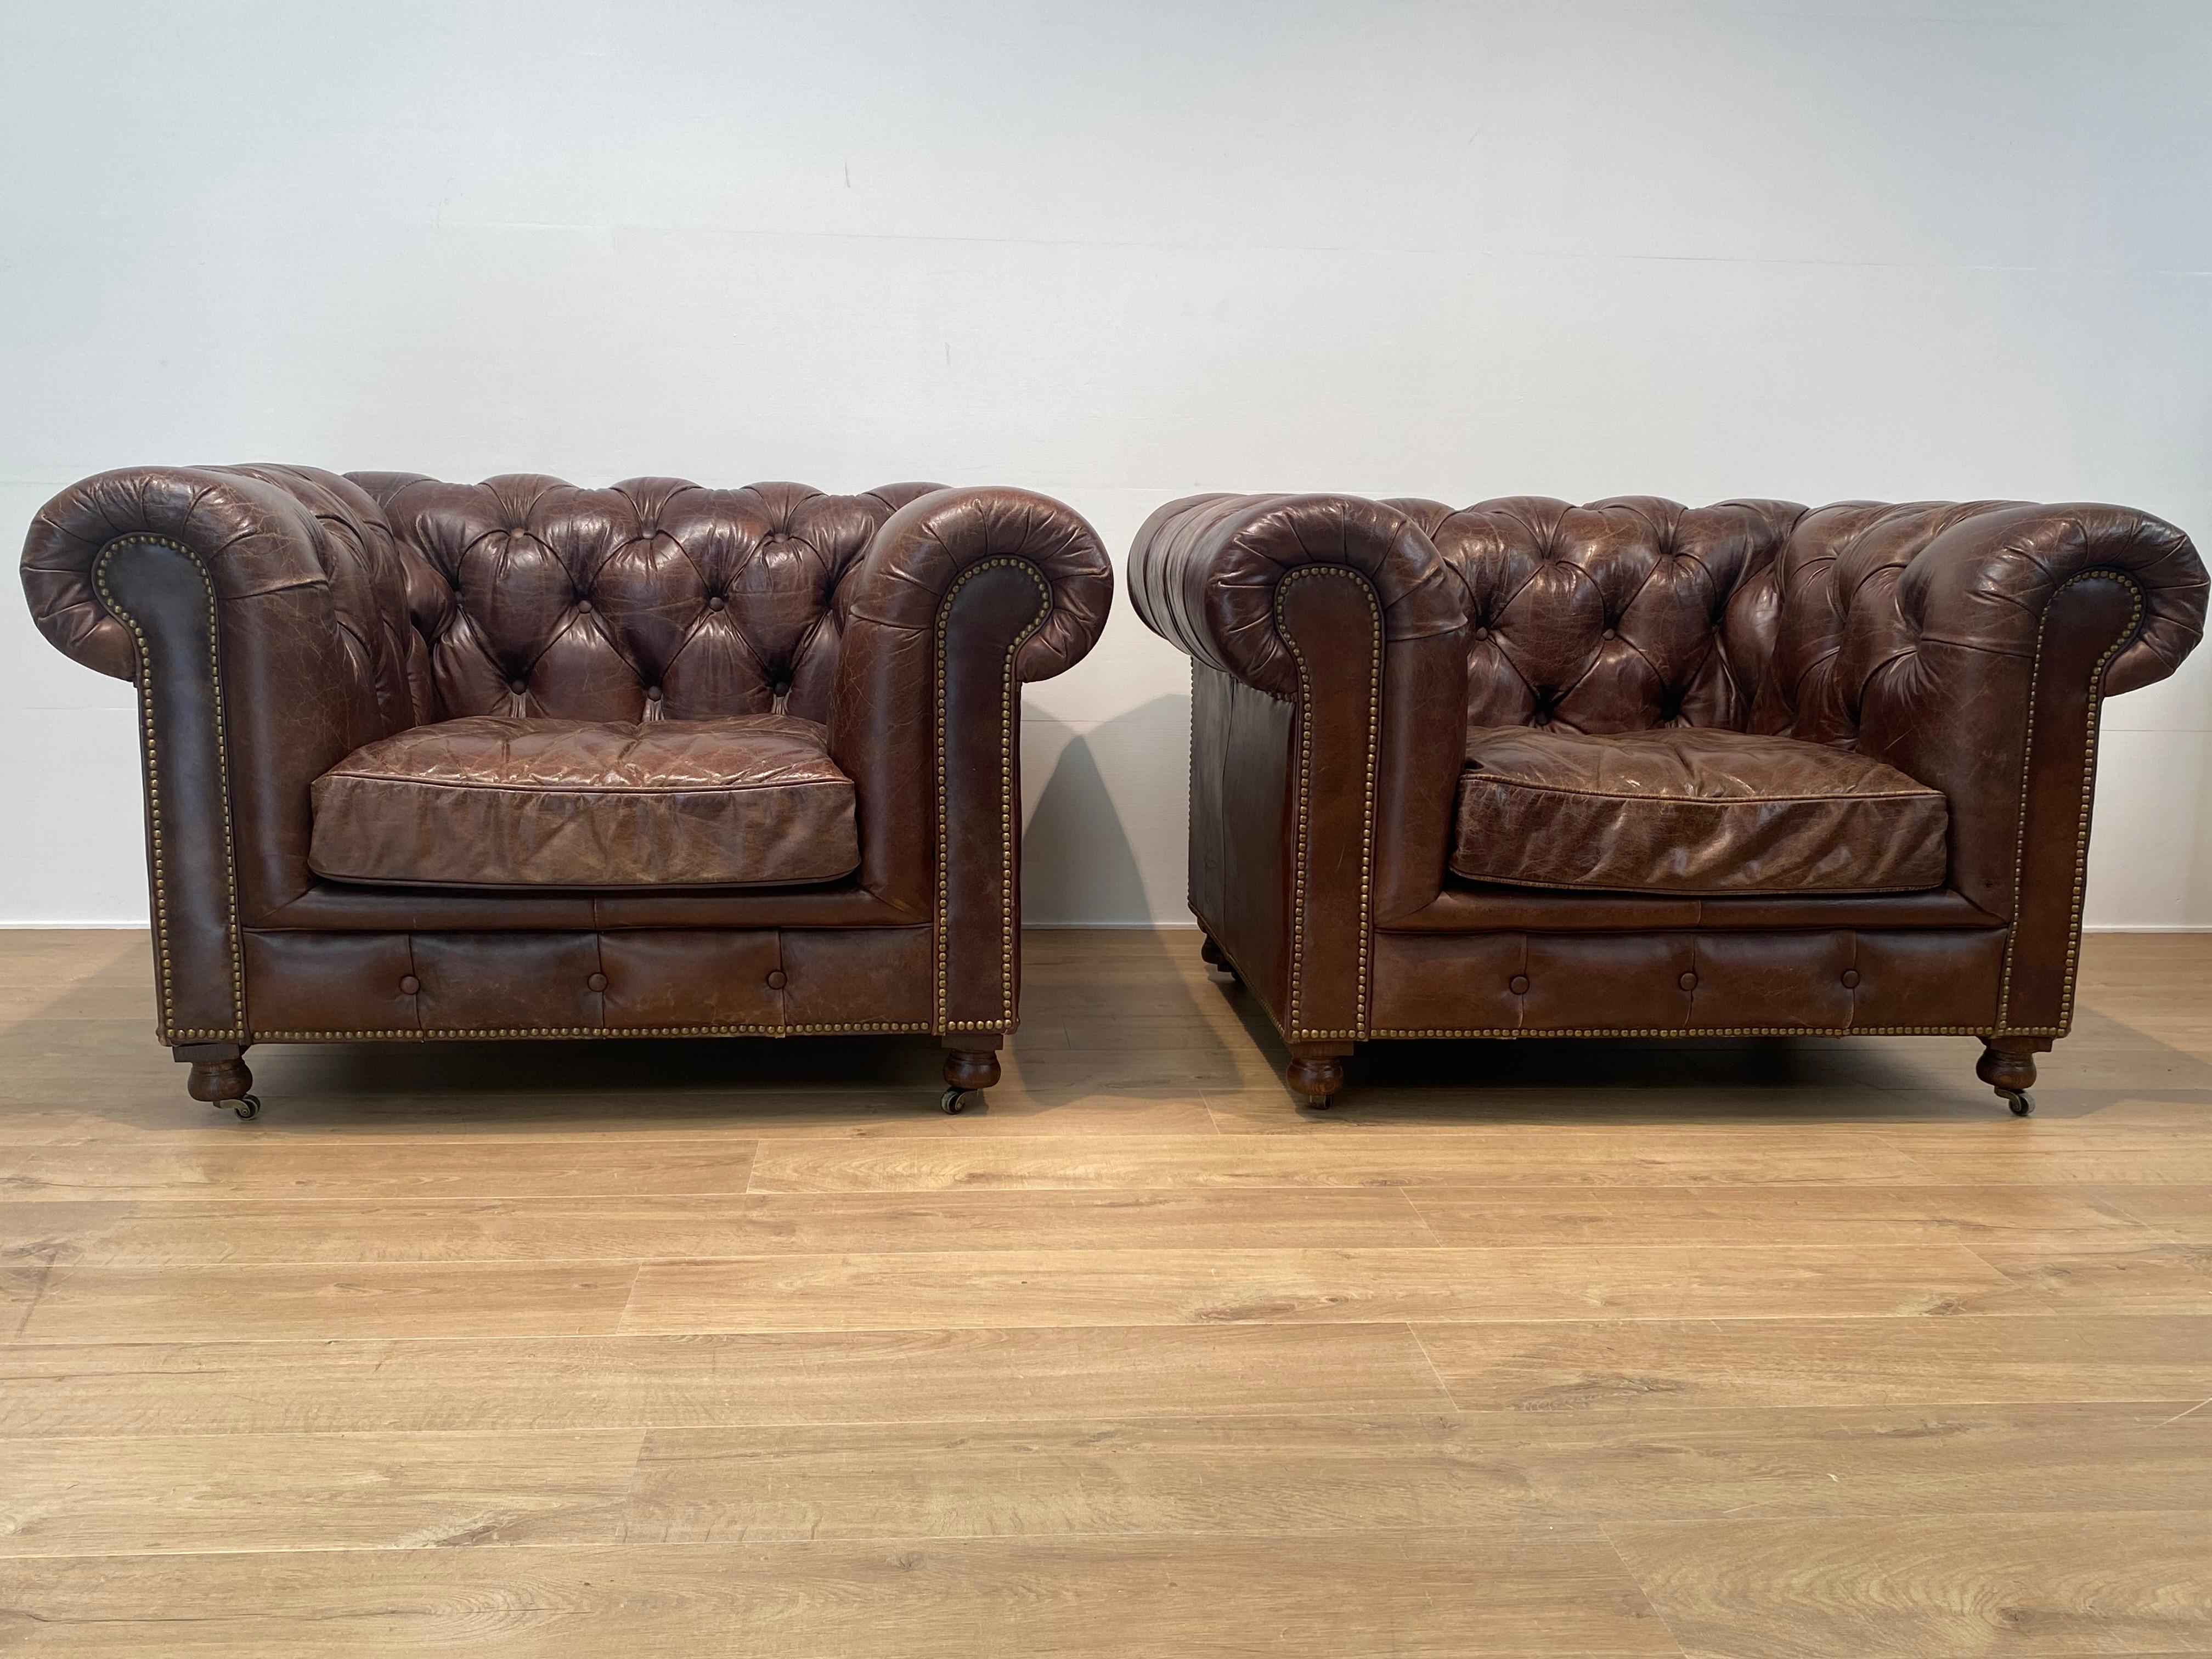 Beautiful Pair of English Leather Chesterfield Club Chairs,
a John Lewis classic Chesterfield Chair with gentle scrolled arms and button detail,in the Antique Whiskey Color,
very comfortable seating, the chairs are in a perfect condition
